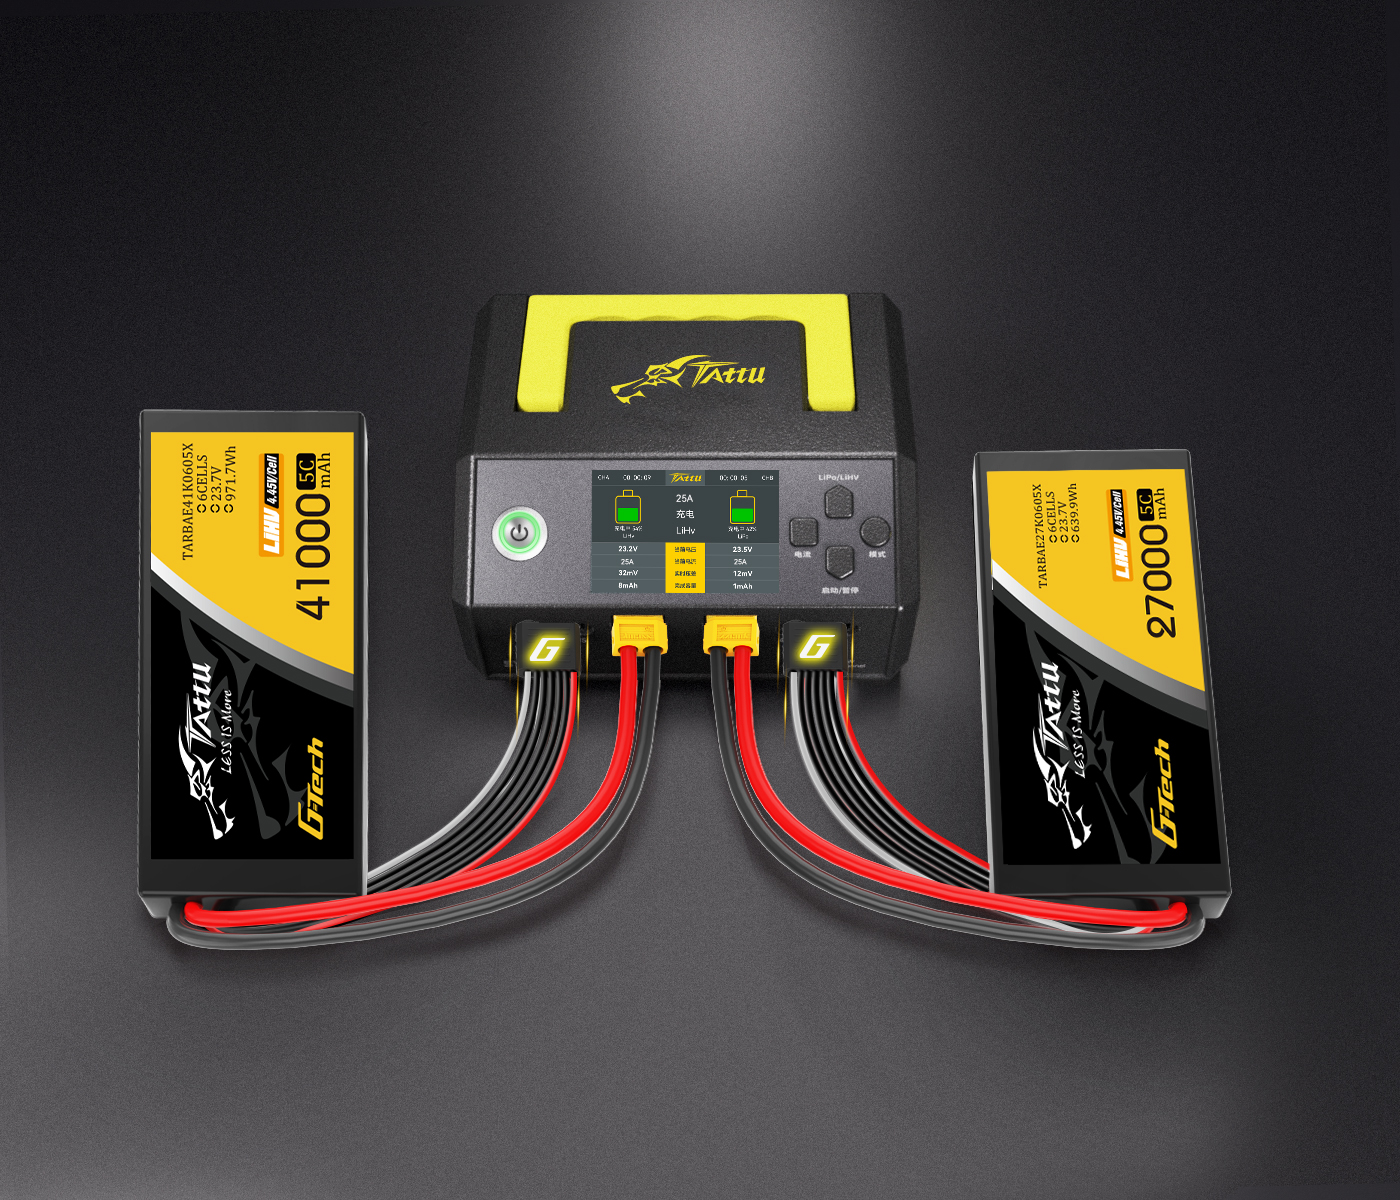 TA1000 Charger and Tattu High Energy/High Voltage Battery Solution